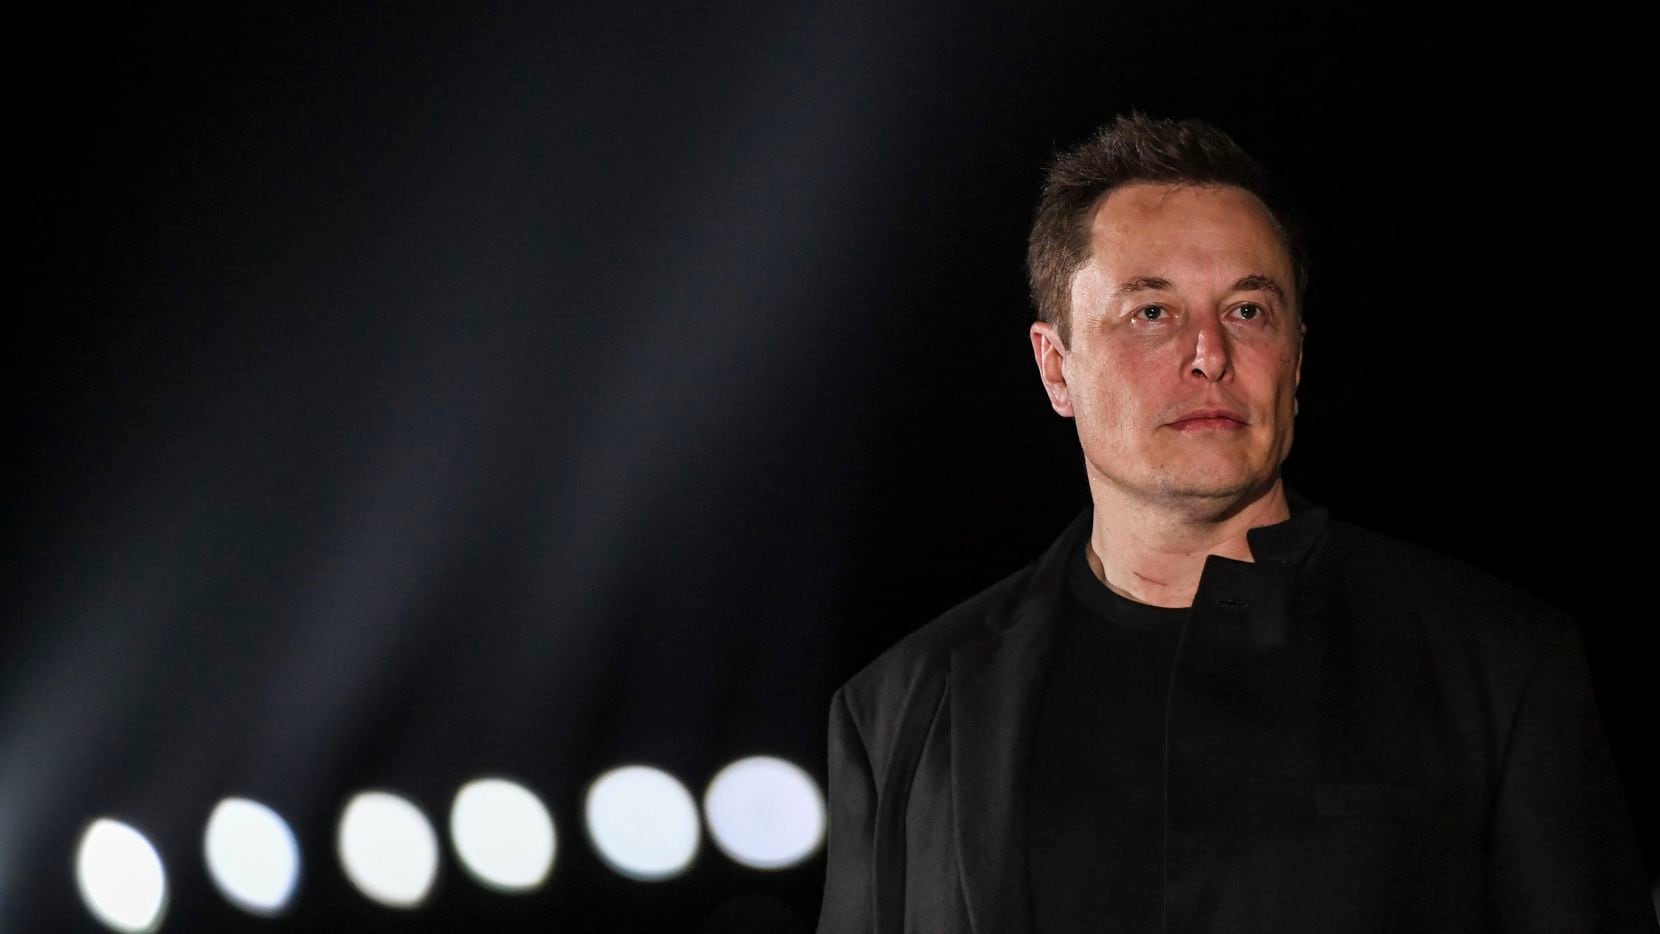 Central Texas has increasingly become a center of activity for billionaire Elon Musk and his...